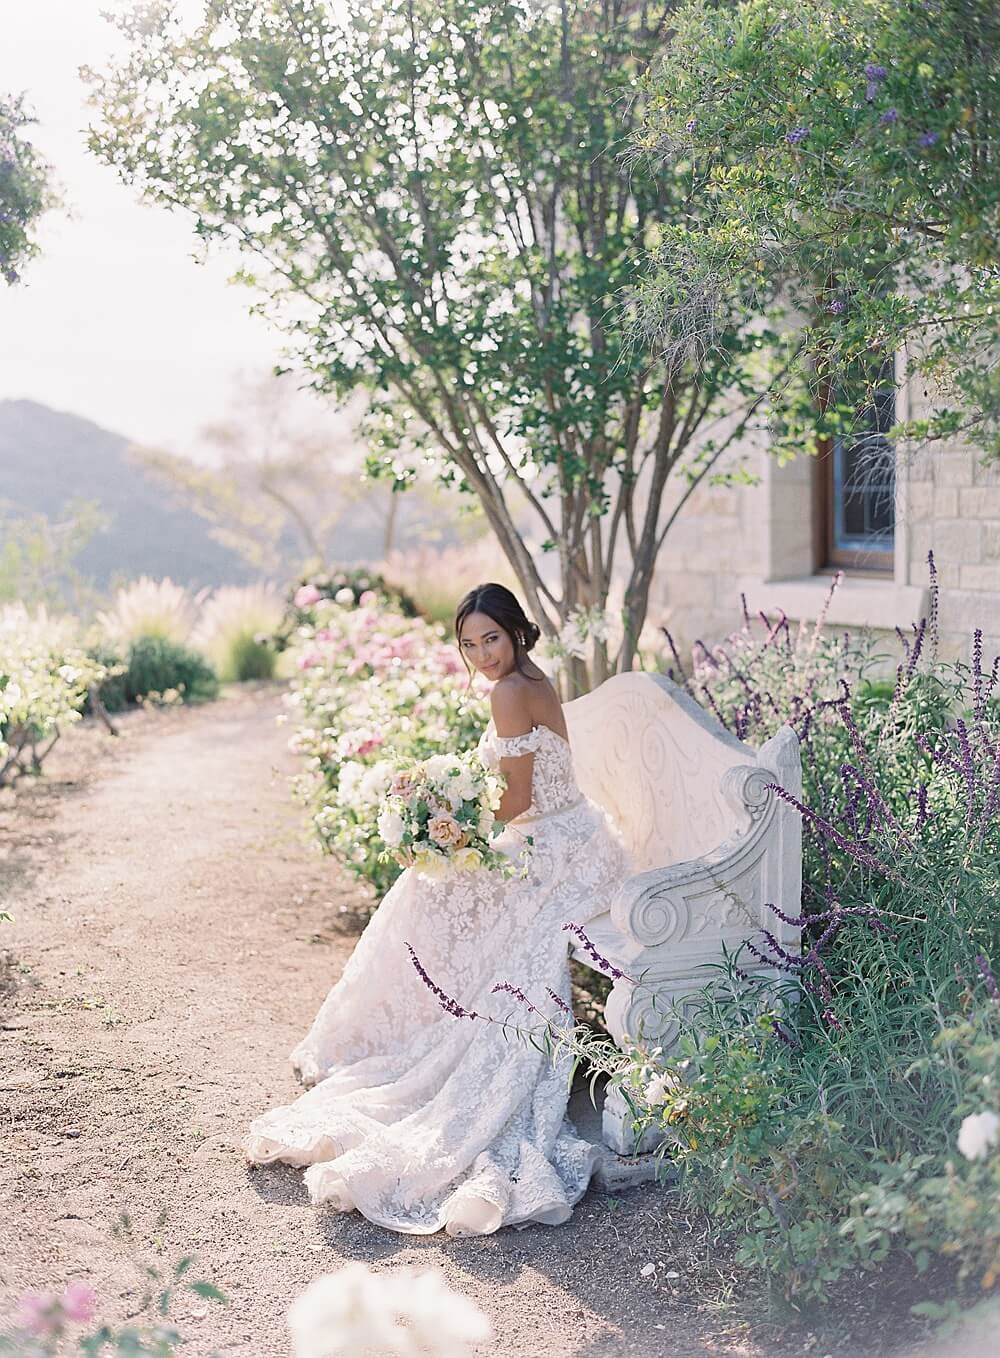 Bride in sunkissed garden at Cal-a-vie spa- Jacqueline Benét Photography